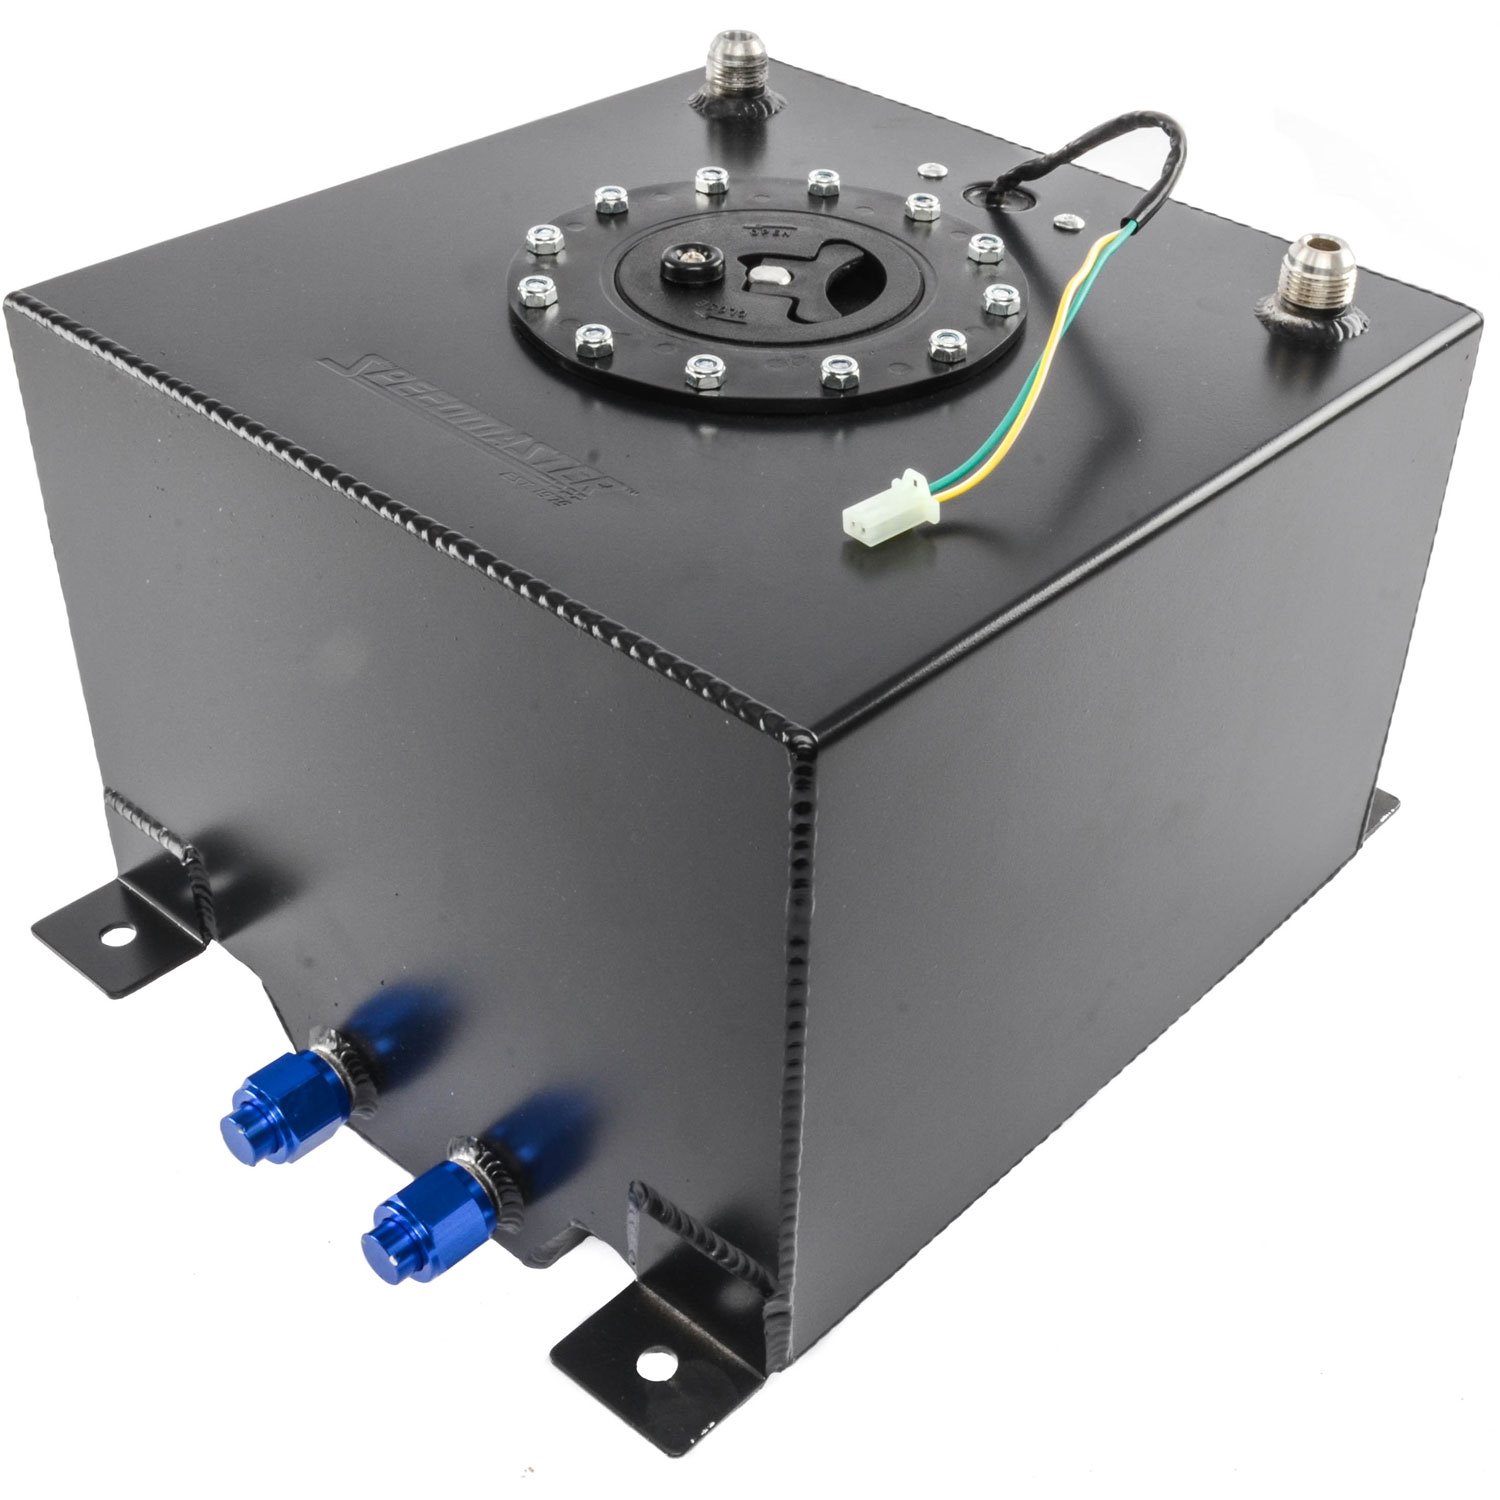 Black Aluminum Fuel Cell with Sender Capacity: 5 Gallons